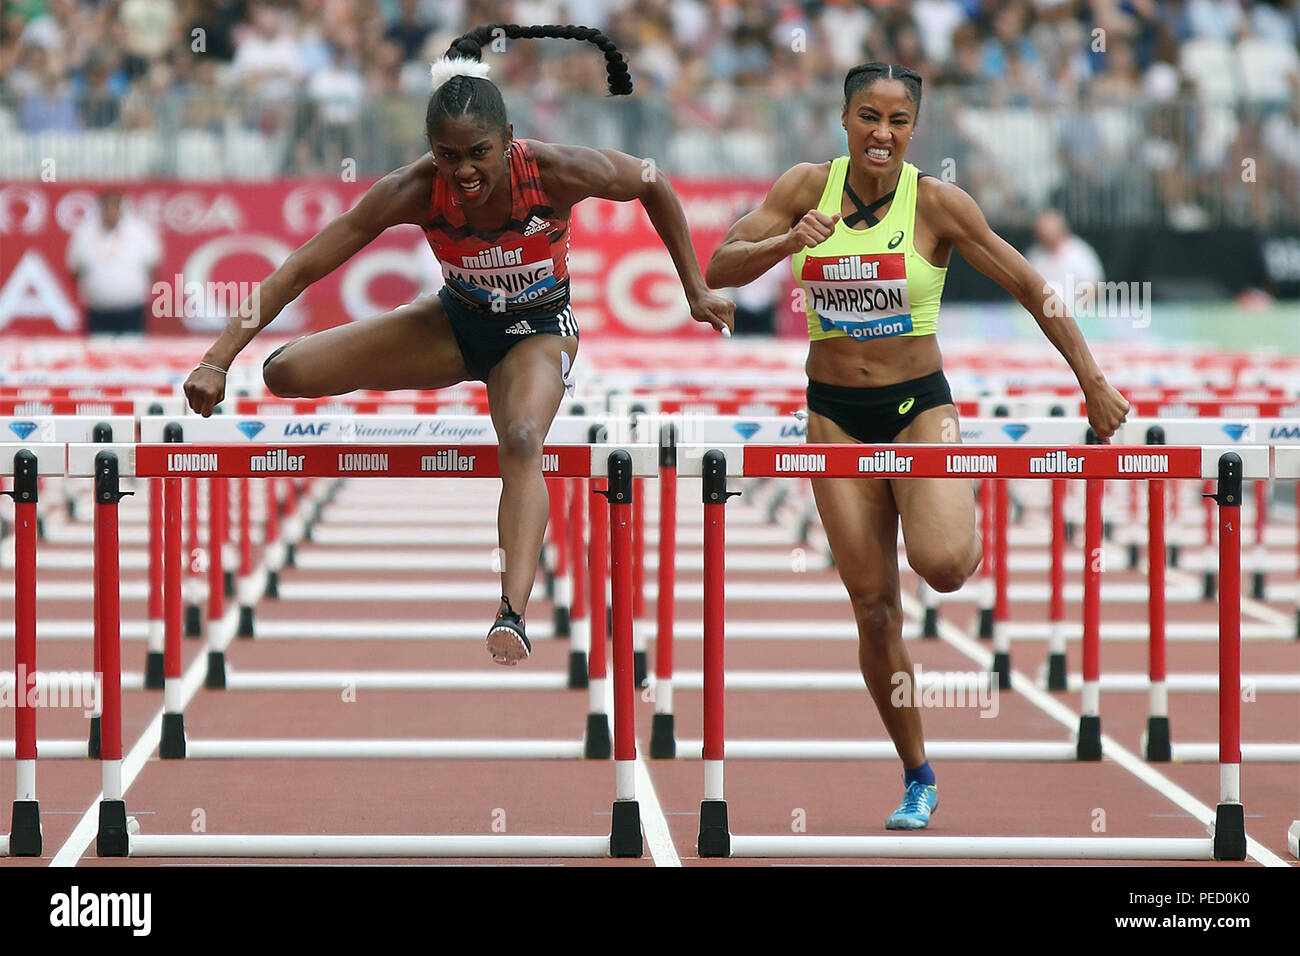 Christina MANNING & Kendra HARRISON of the USA in the womens 100 metres hurdles at the 2018 Muller Anniversary games in London Stock Photo